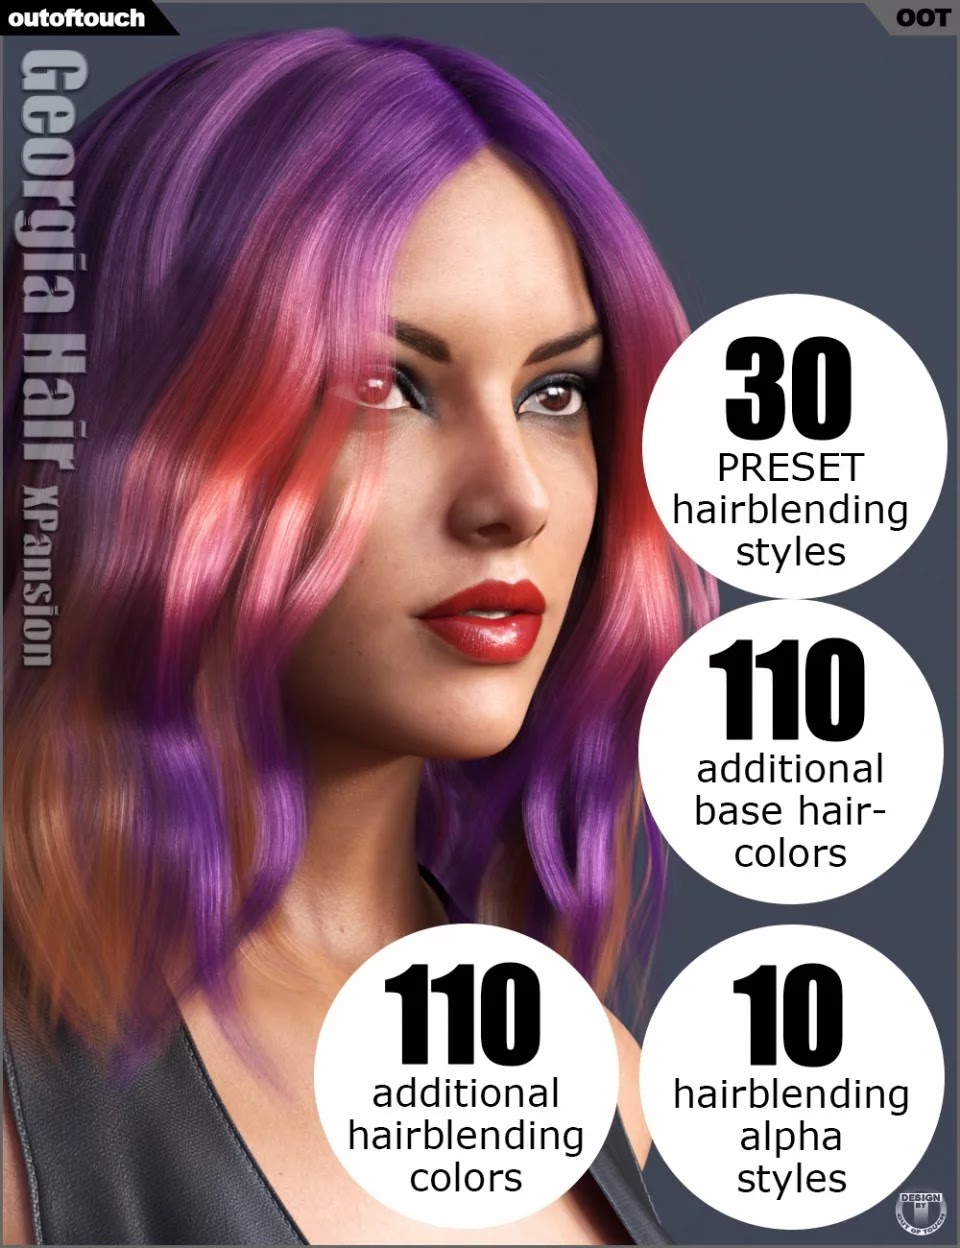 Georgia Hair and OOT Hairblending 2.0 Texture XPansion_DAZ3D下载站